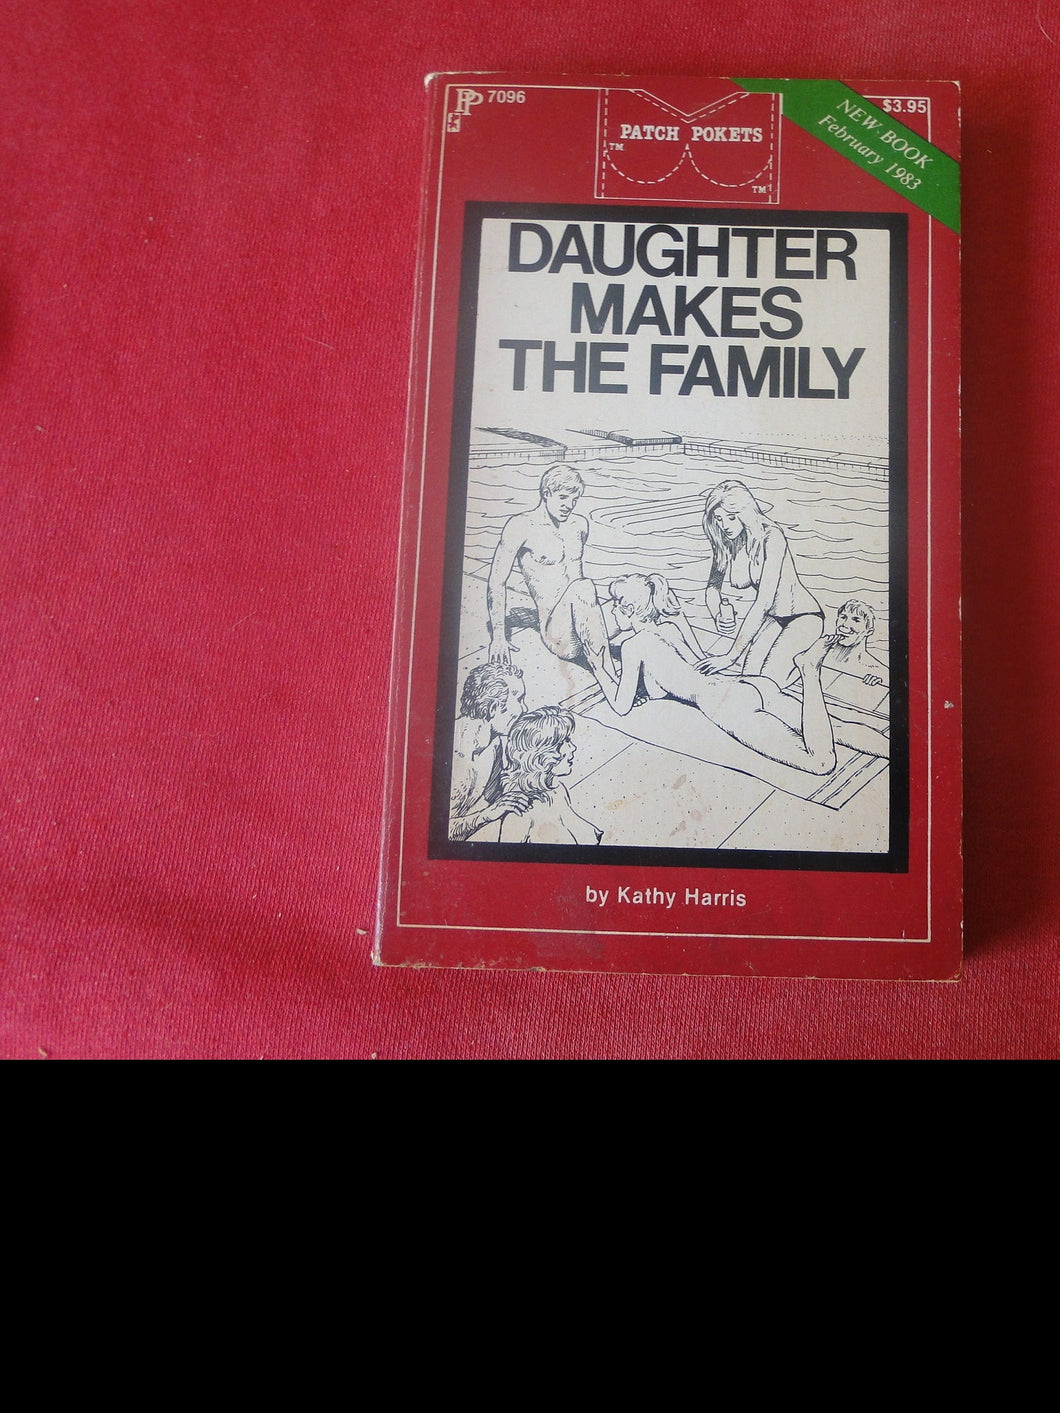 Vintage Adult Paperback Novel/Book Daughter Makes The Family Patch Pokets   PB5